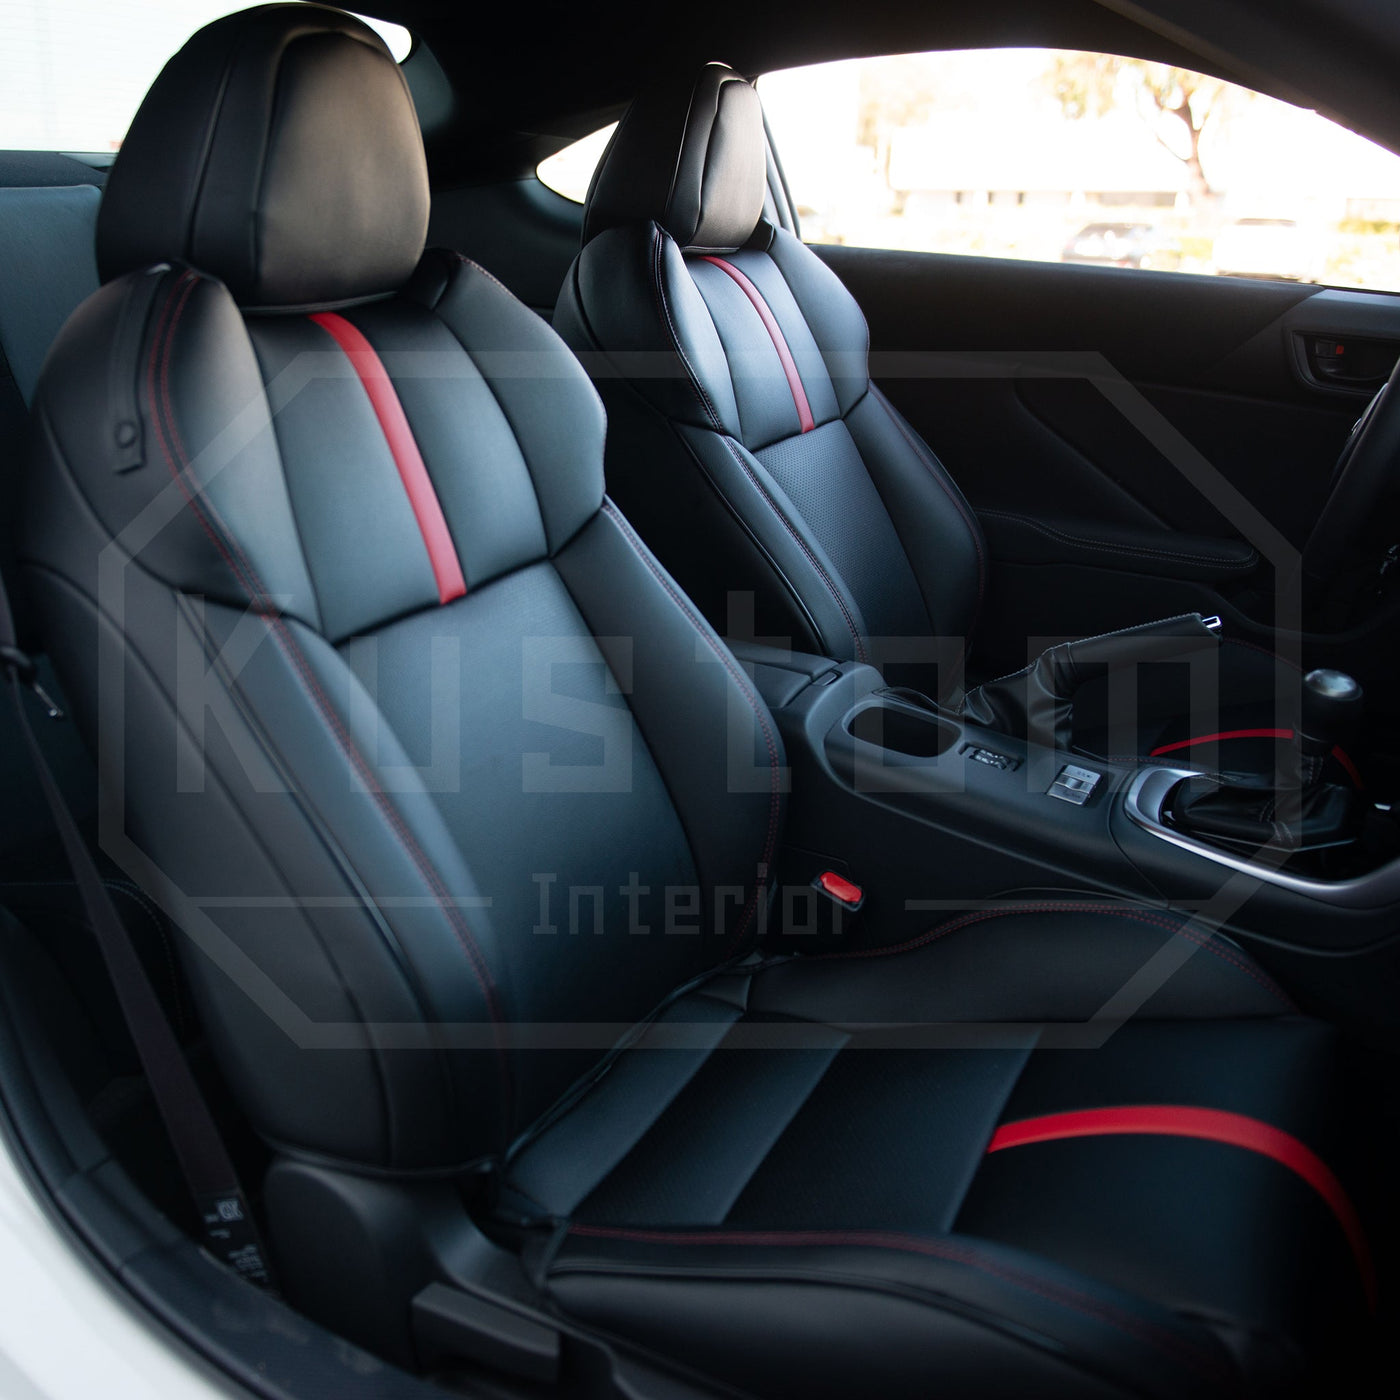 Toyota GT 86 -Semi-Tailored Seat Covers Car Seat Covers